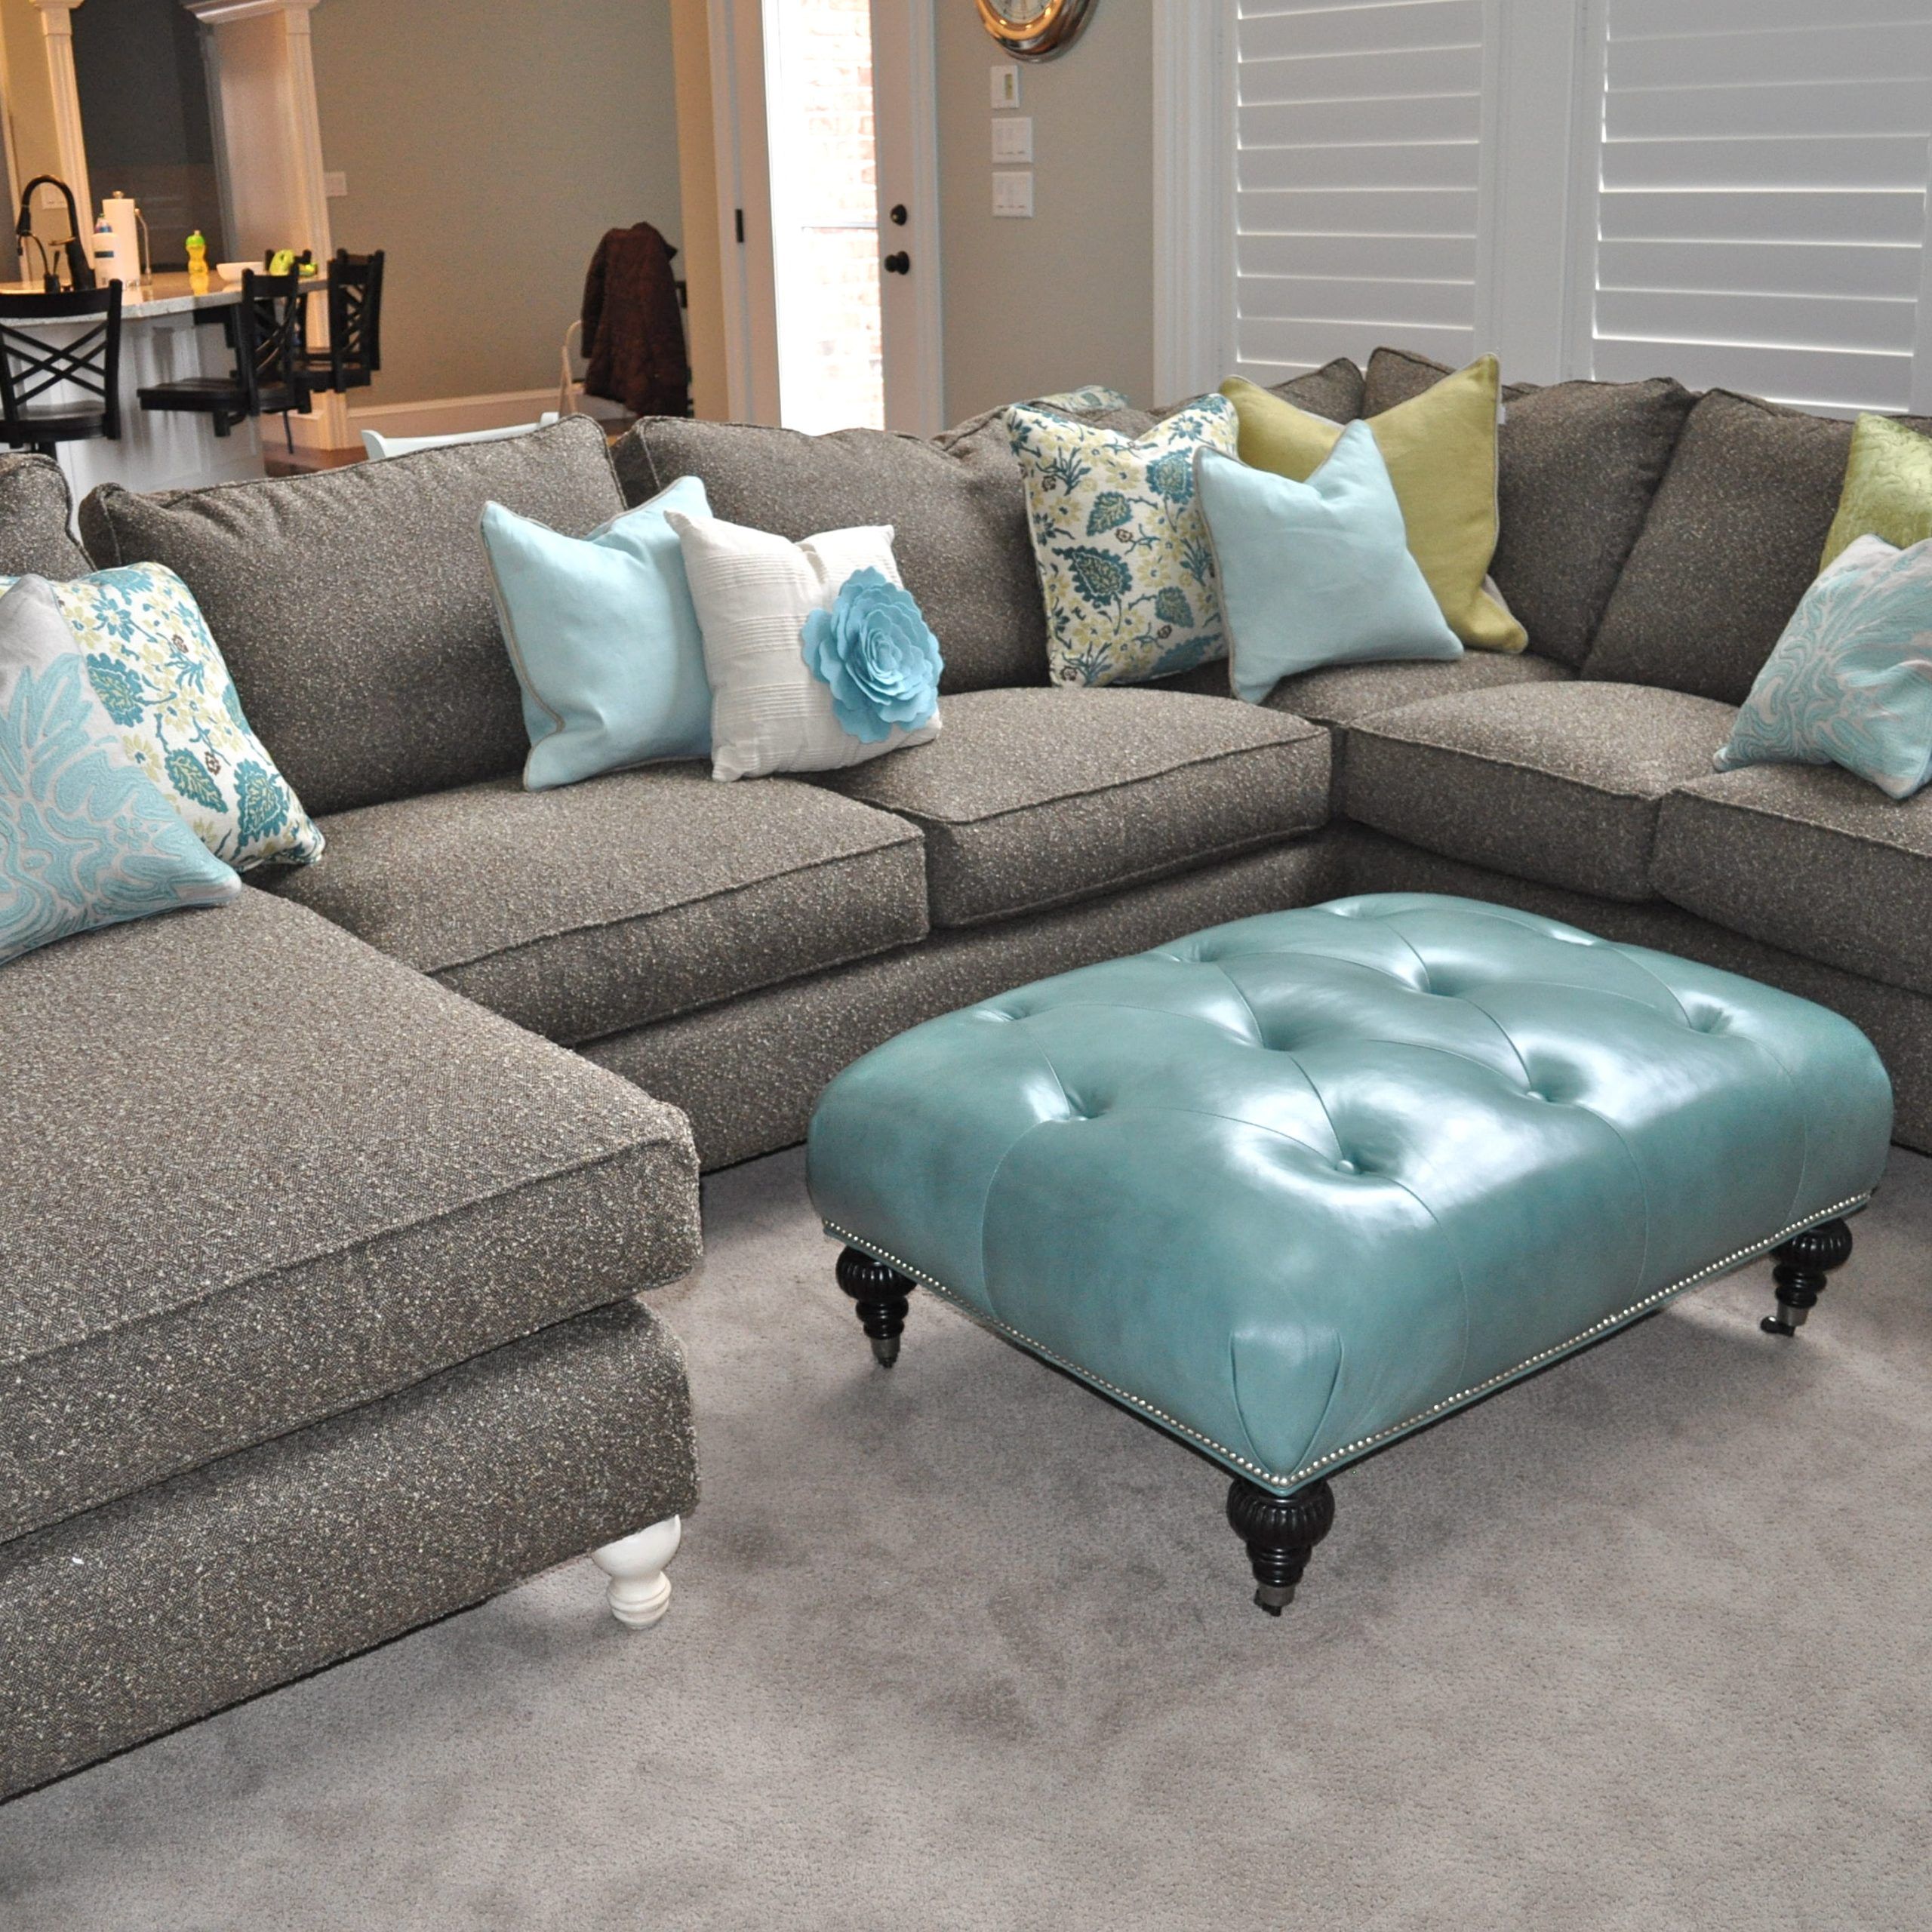 U Shaped Sectional With Chaise Design – Homesfeed Regarding Modern U Shape Sectional Sofas In Gray (Gallery 6 of 20)